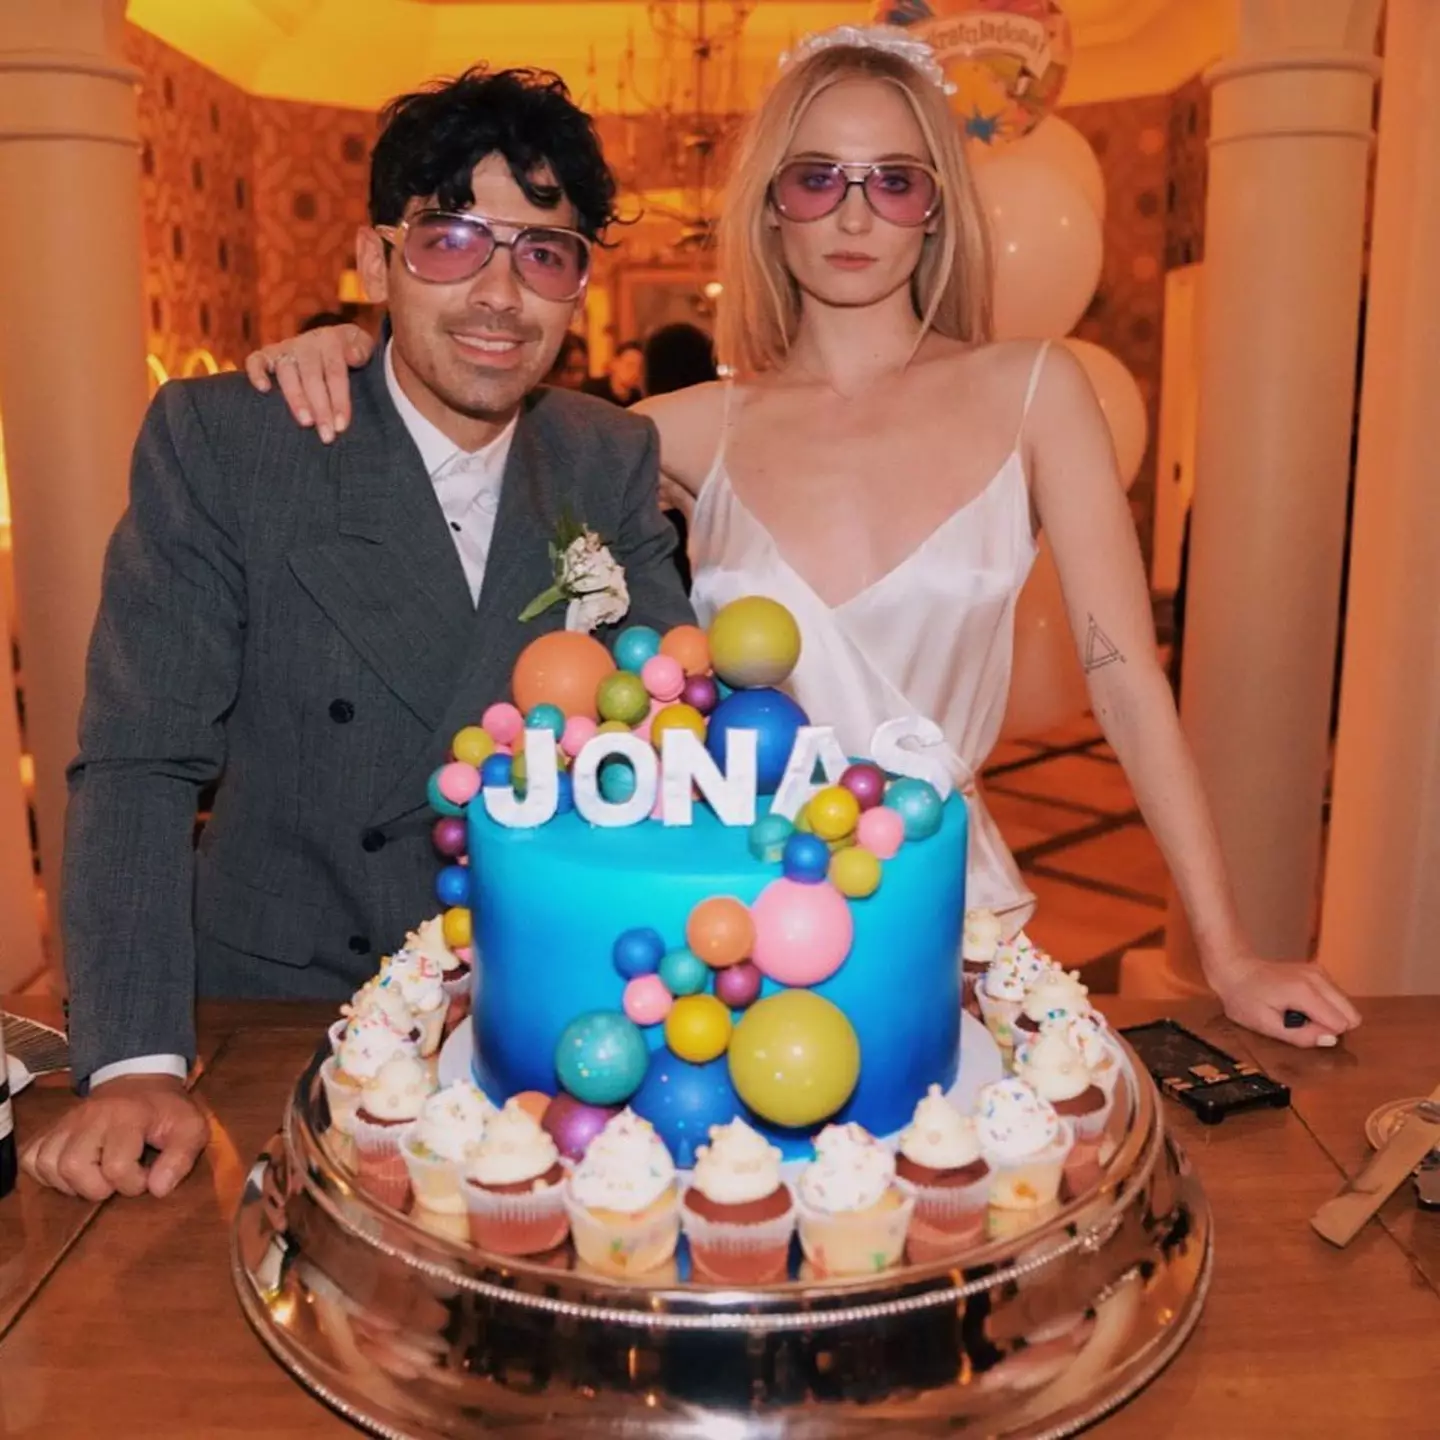 Sophie Turner and Joe Jonas' marriage has sadly come to an end.